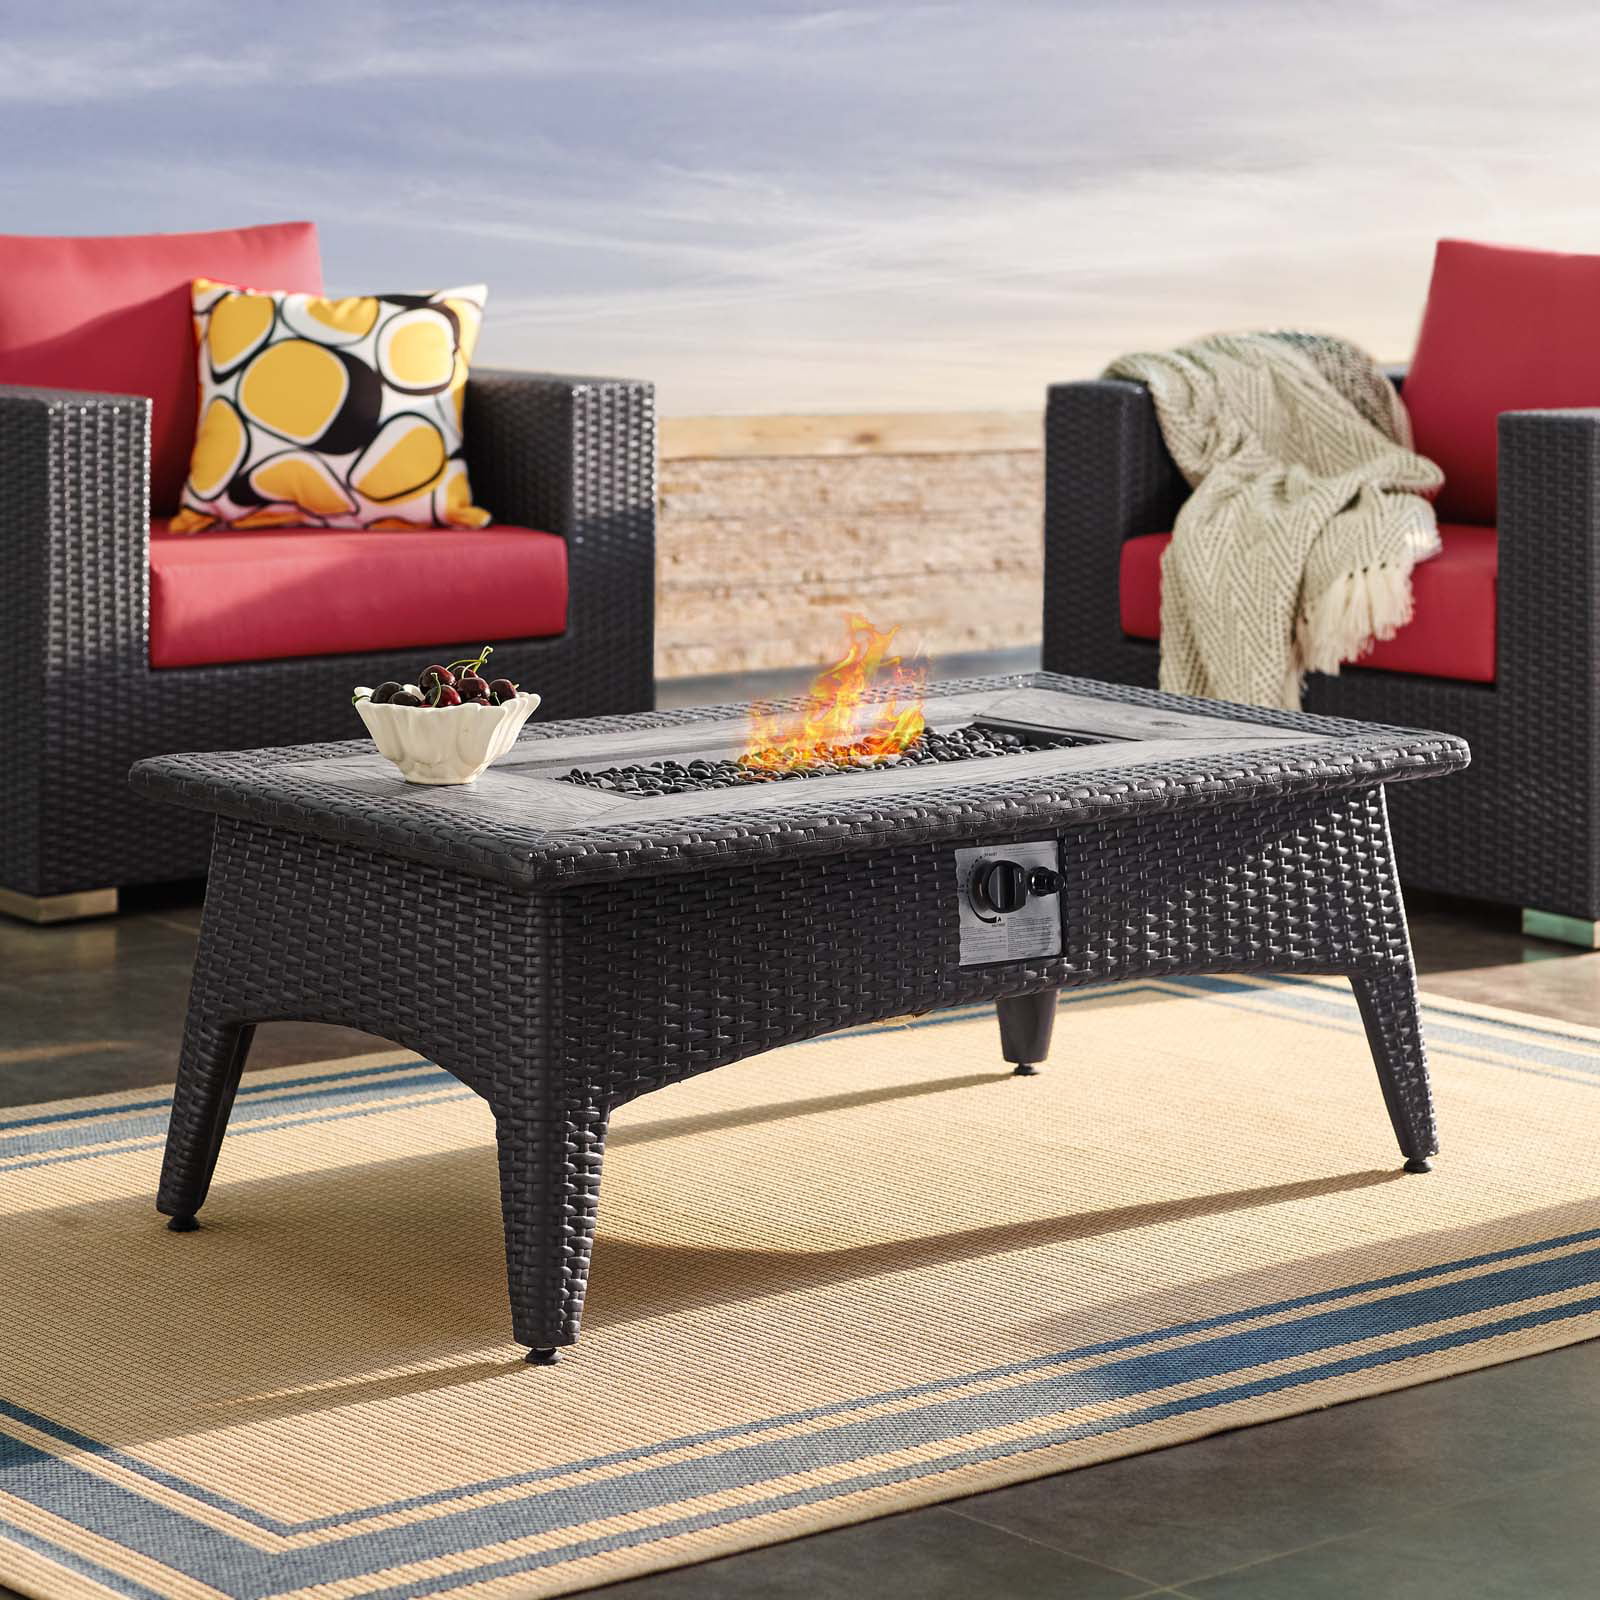 Cosiest Outdoor Propane Fire Pit Coffee, Zira Fire Pit Table